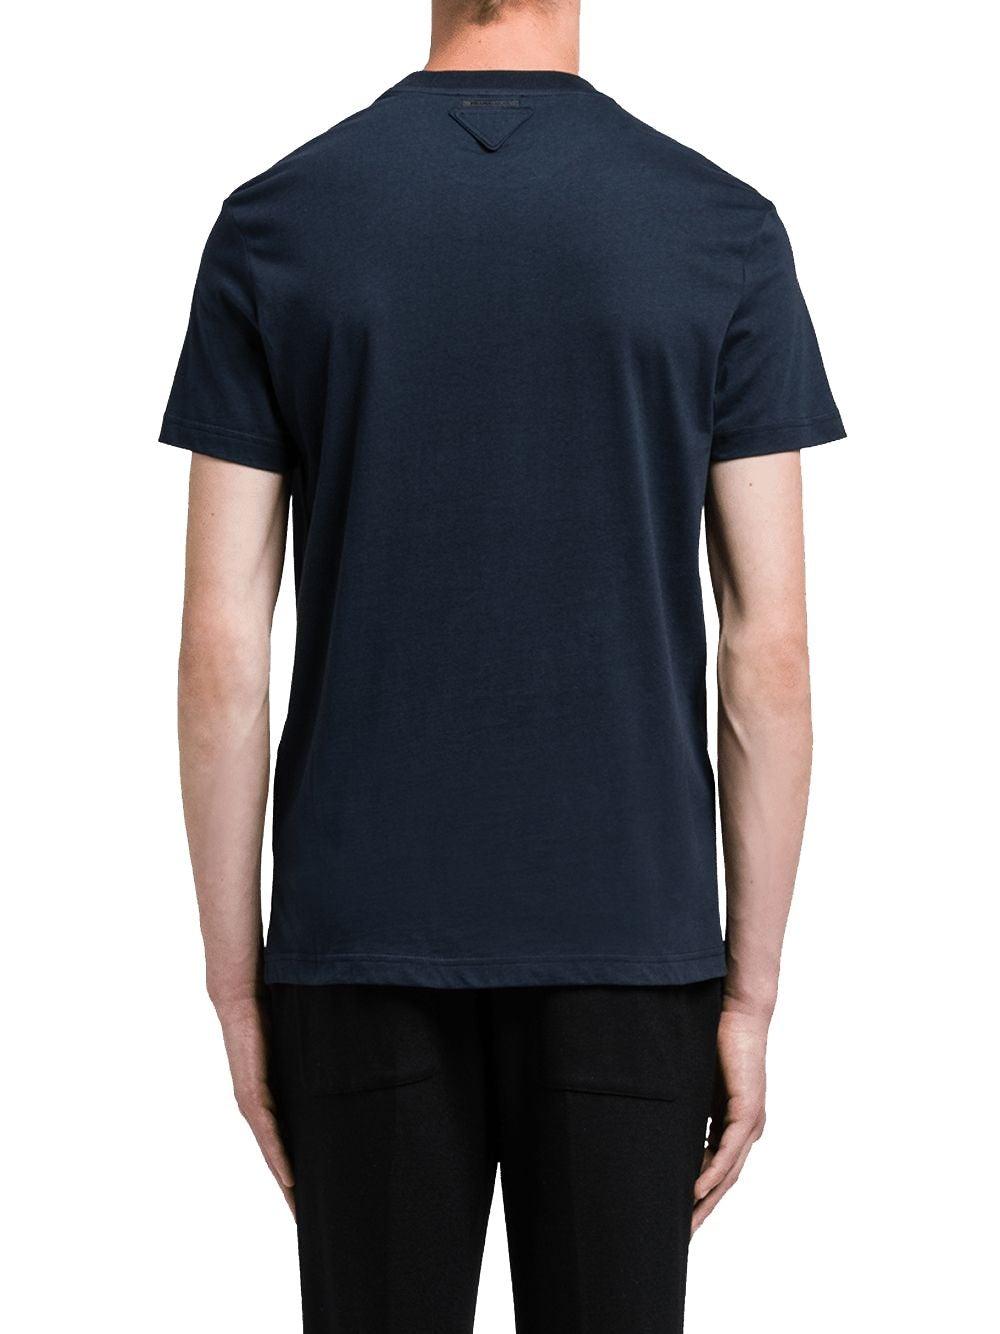 Prada Cotton Triple Pack Crew Neck T-shirts in Blue for Men - Save 